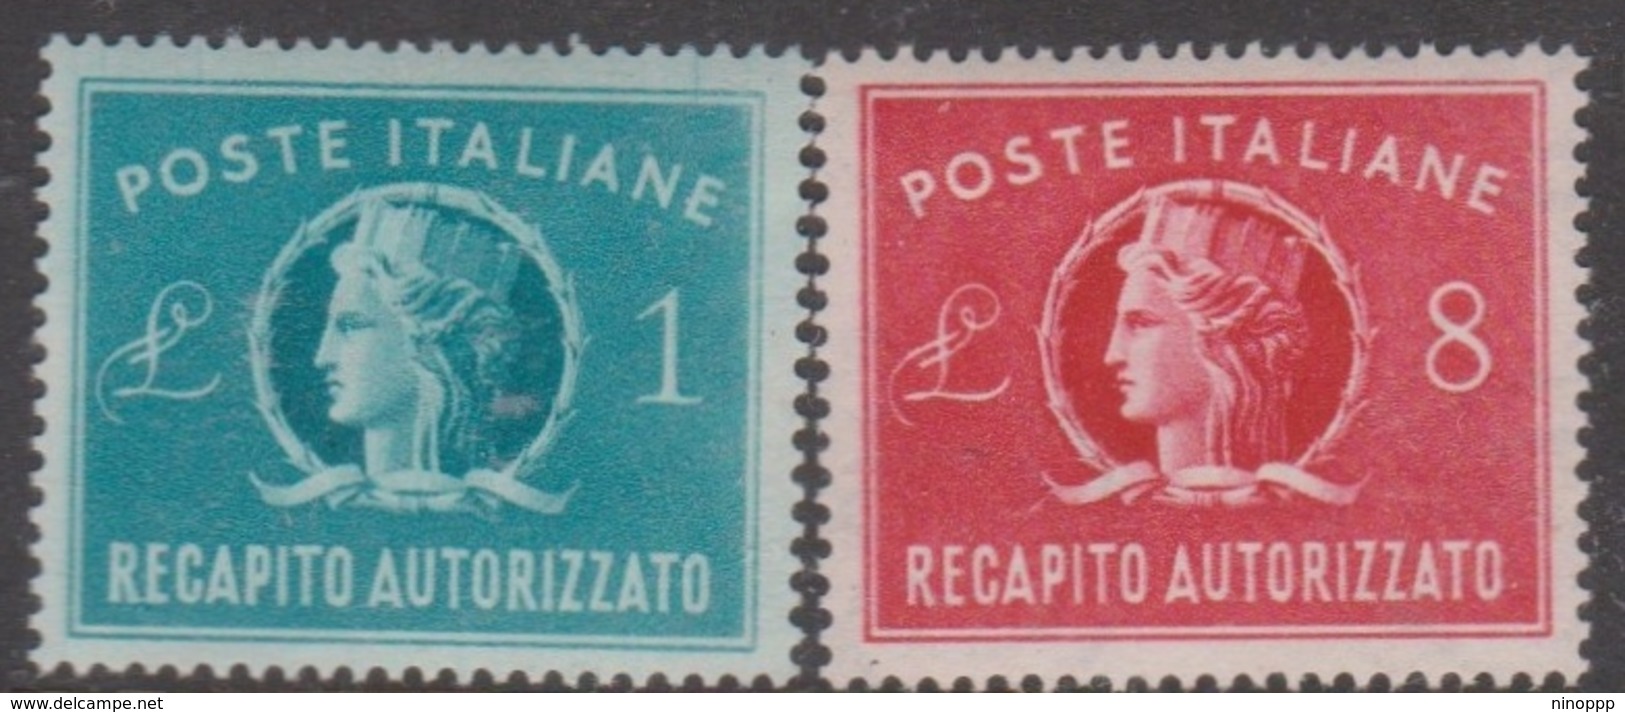 Italy AD 8-9 1947 Authorized Delivery Stamps, Mint Hinged - 1946-60: Mint/hinged